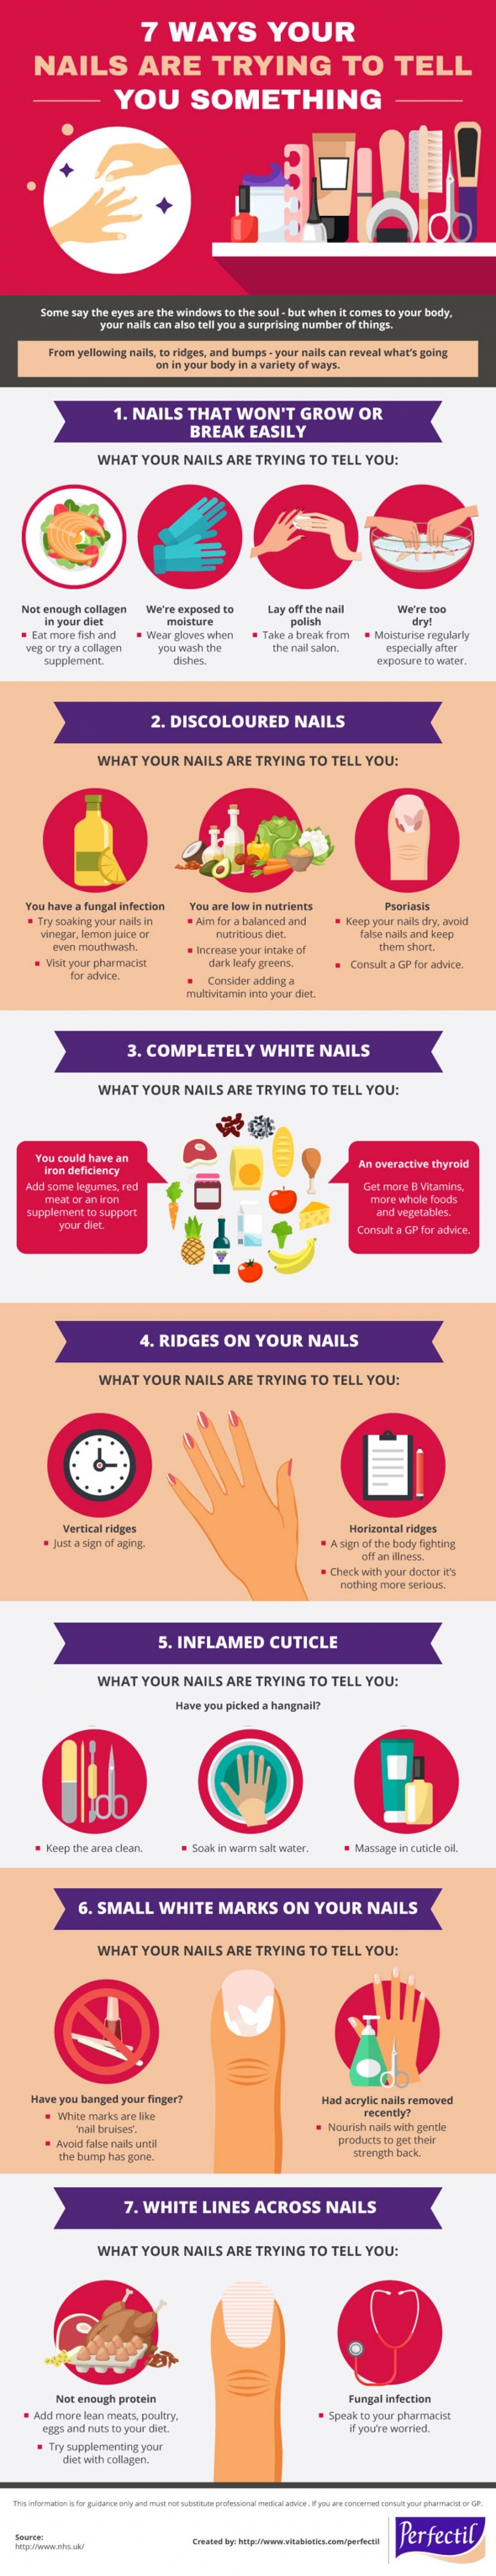 7 Common Nail Problems and Solutions [Infographic]